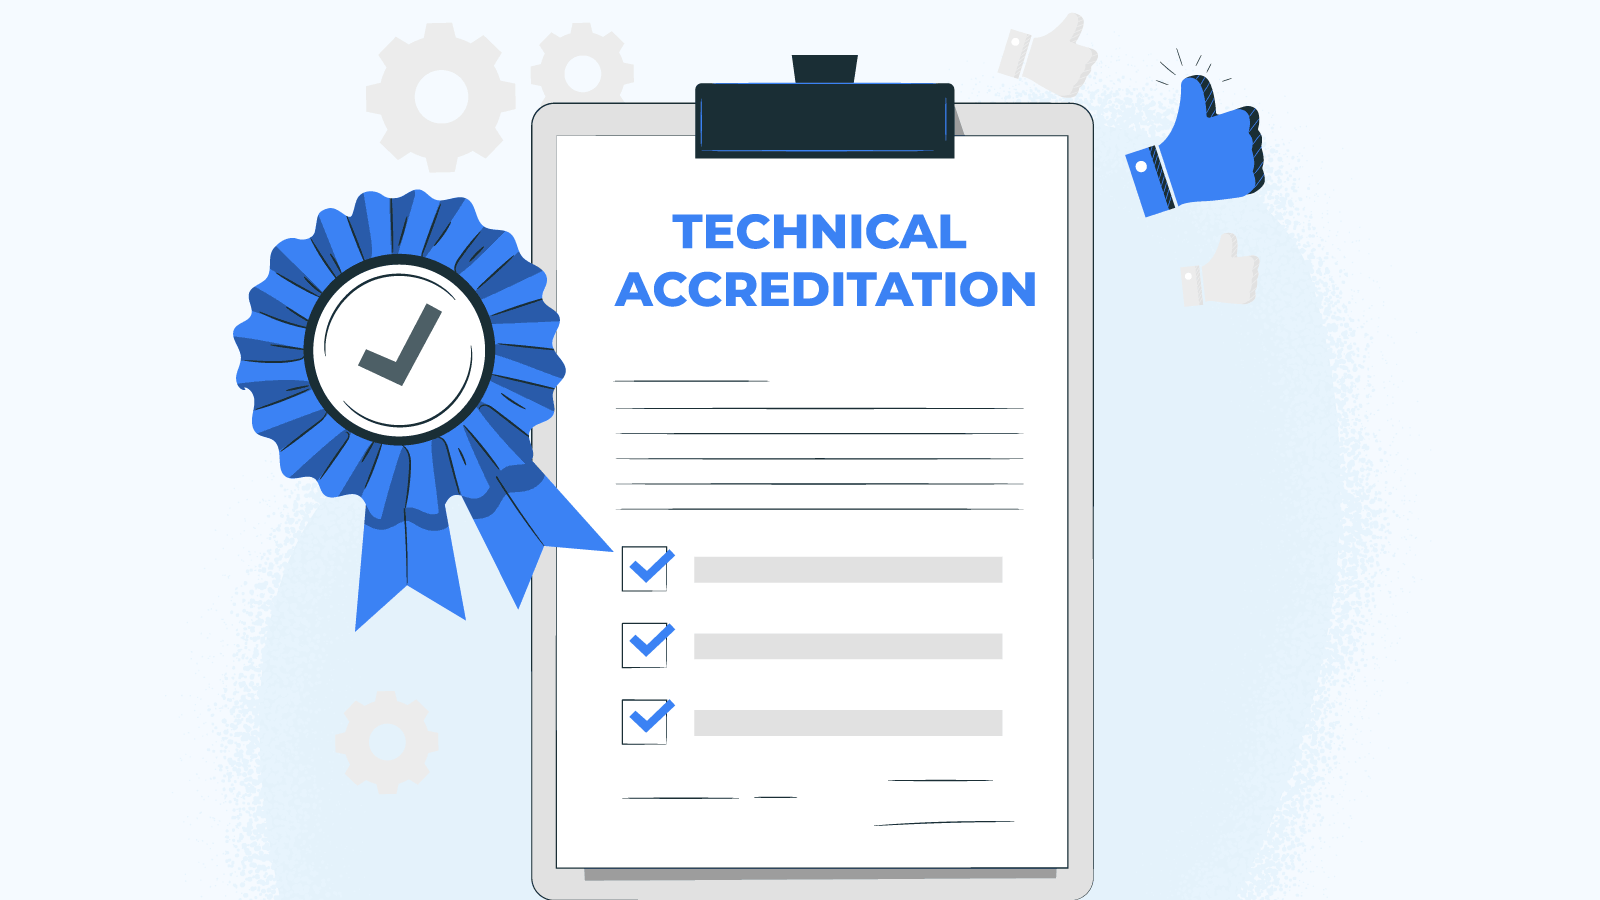 Further Technical Accreditation